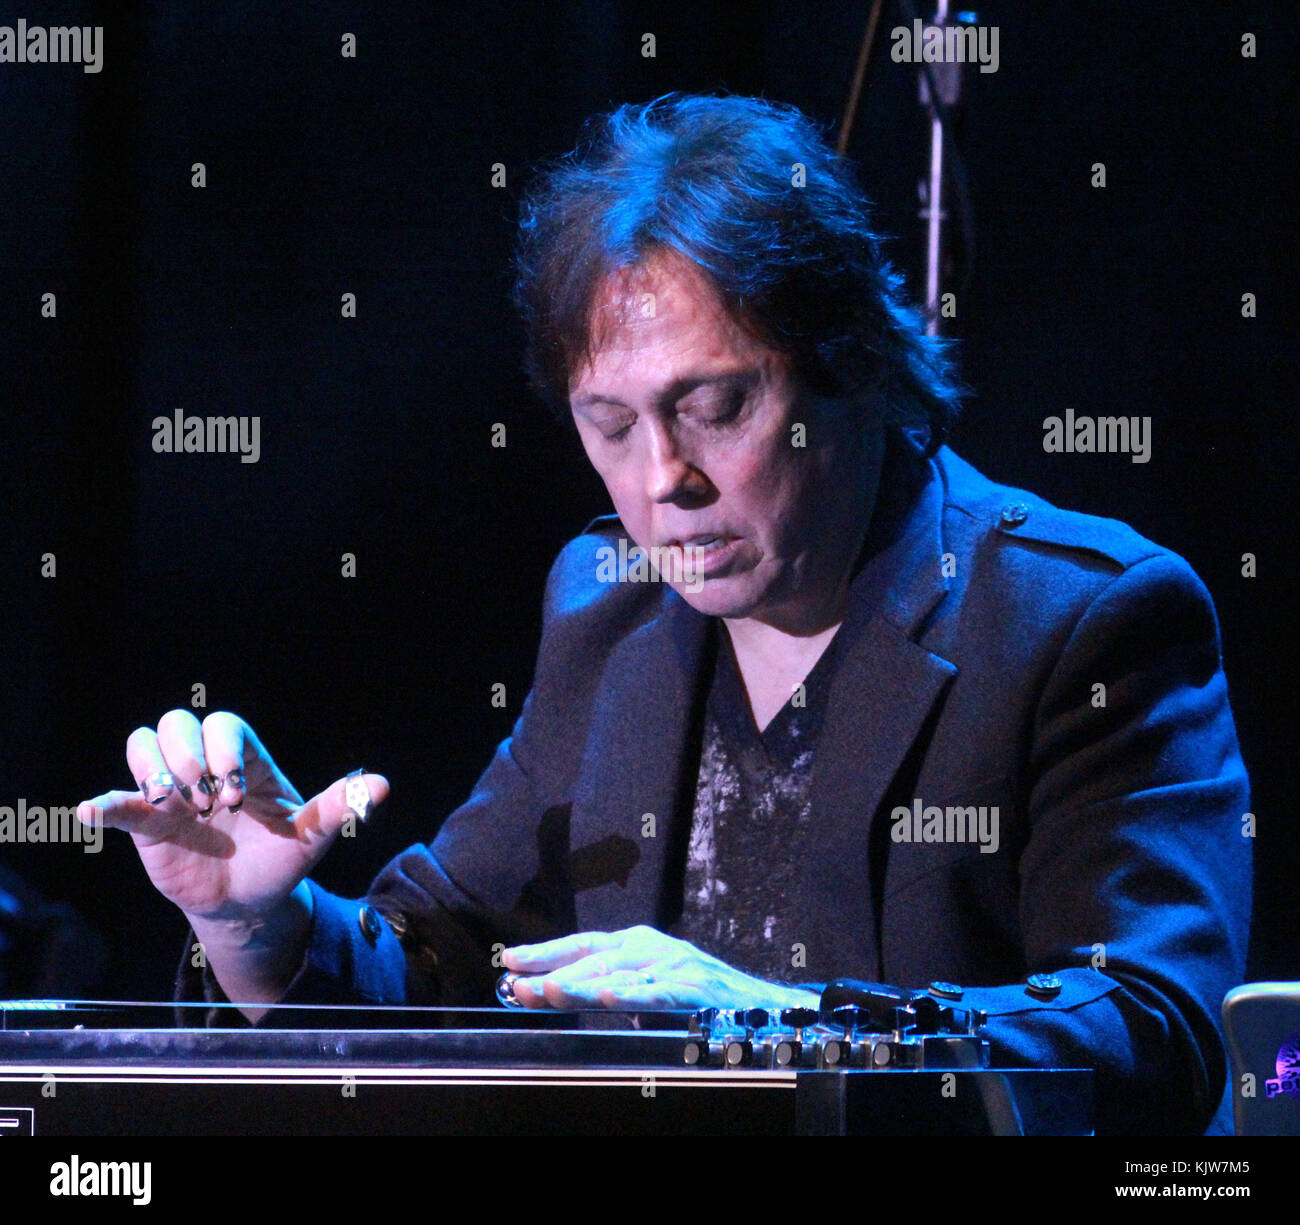 LAS VEGAS, NV., Nov. 24, 2017- John McFee of the Doobie Brothers performs Friday, Nov. 24, 2017 at the Orlean's Resort in Las Vegas, NV. He joined the group in 1979. · NO WIRE SERVICE · Photo: Barry Sweet/BARRY SWEET/dpa Stock Photo